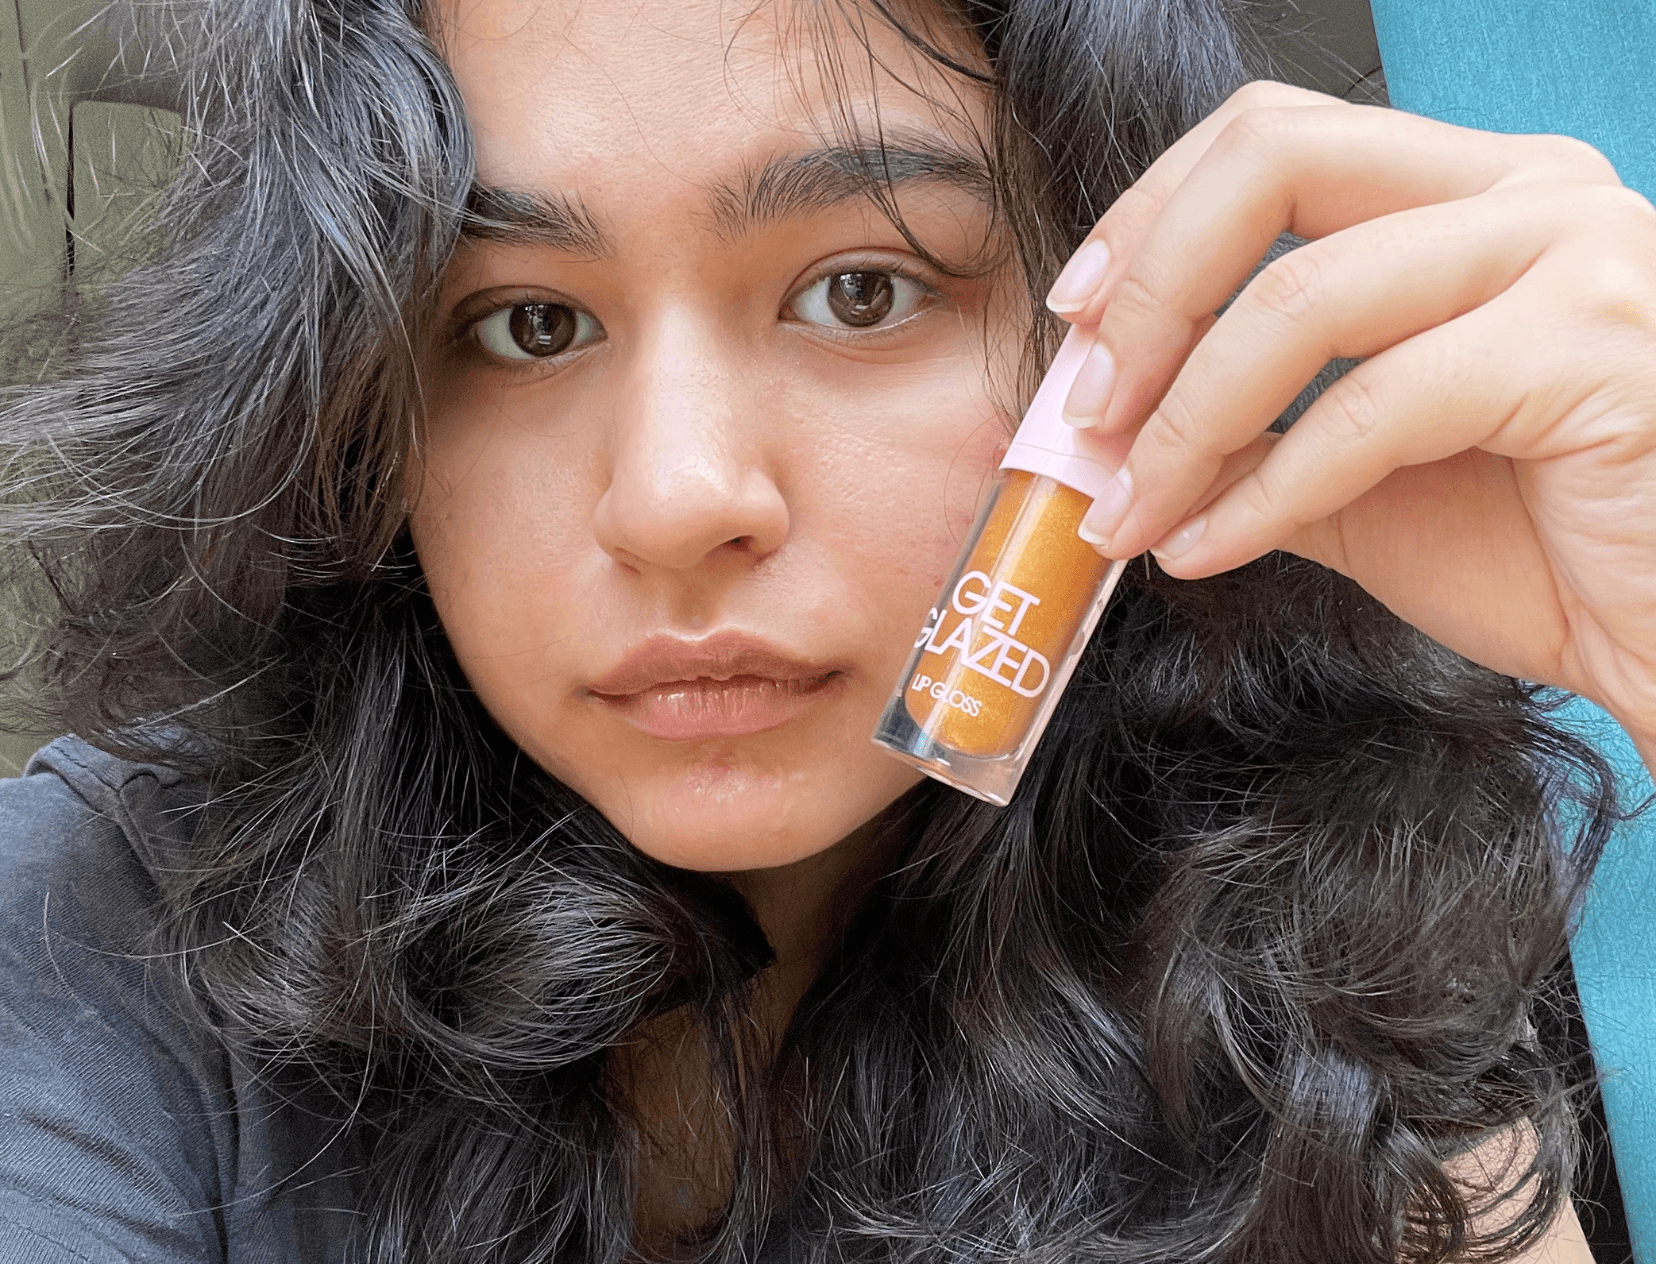 Flossy Cosmetics&#8217; Get Glazed 24k Lip Gloss Has Travelled With Me On Every Single Flight, Here&#8217;s Why